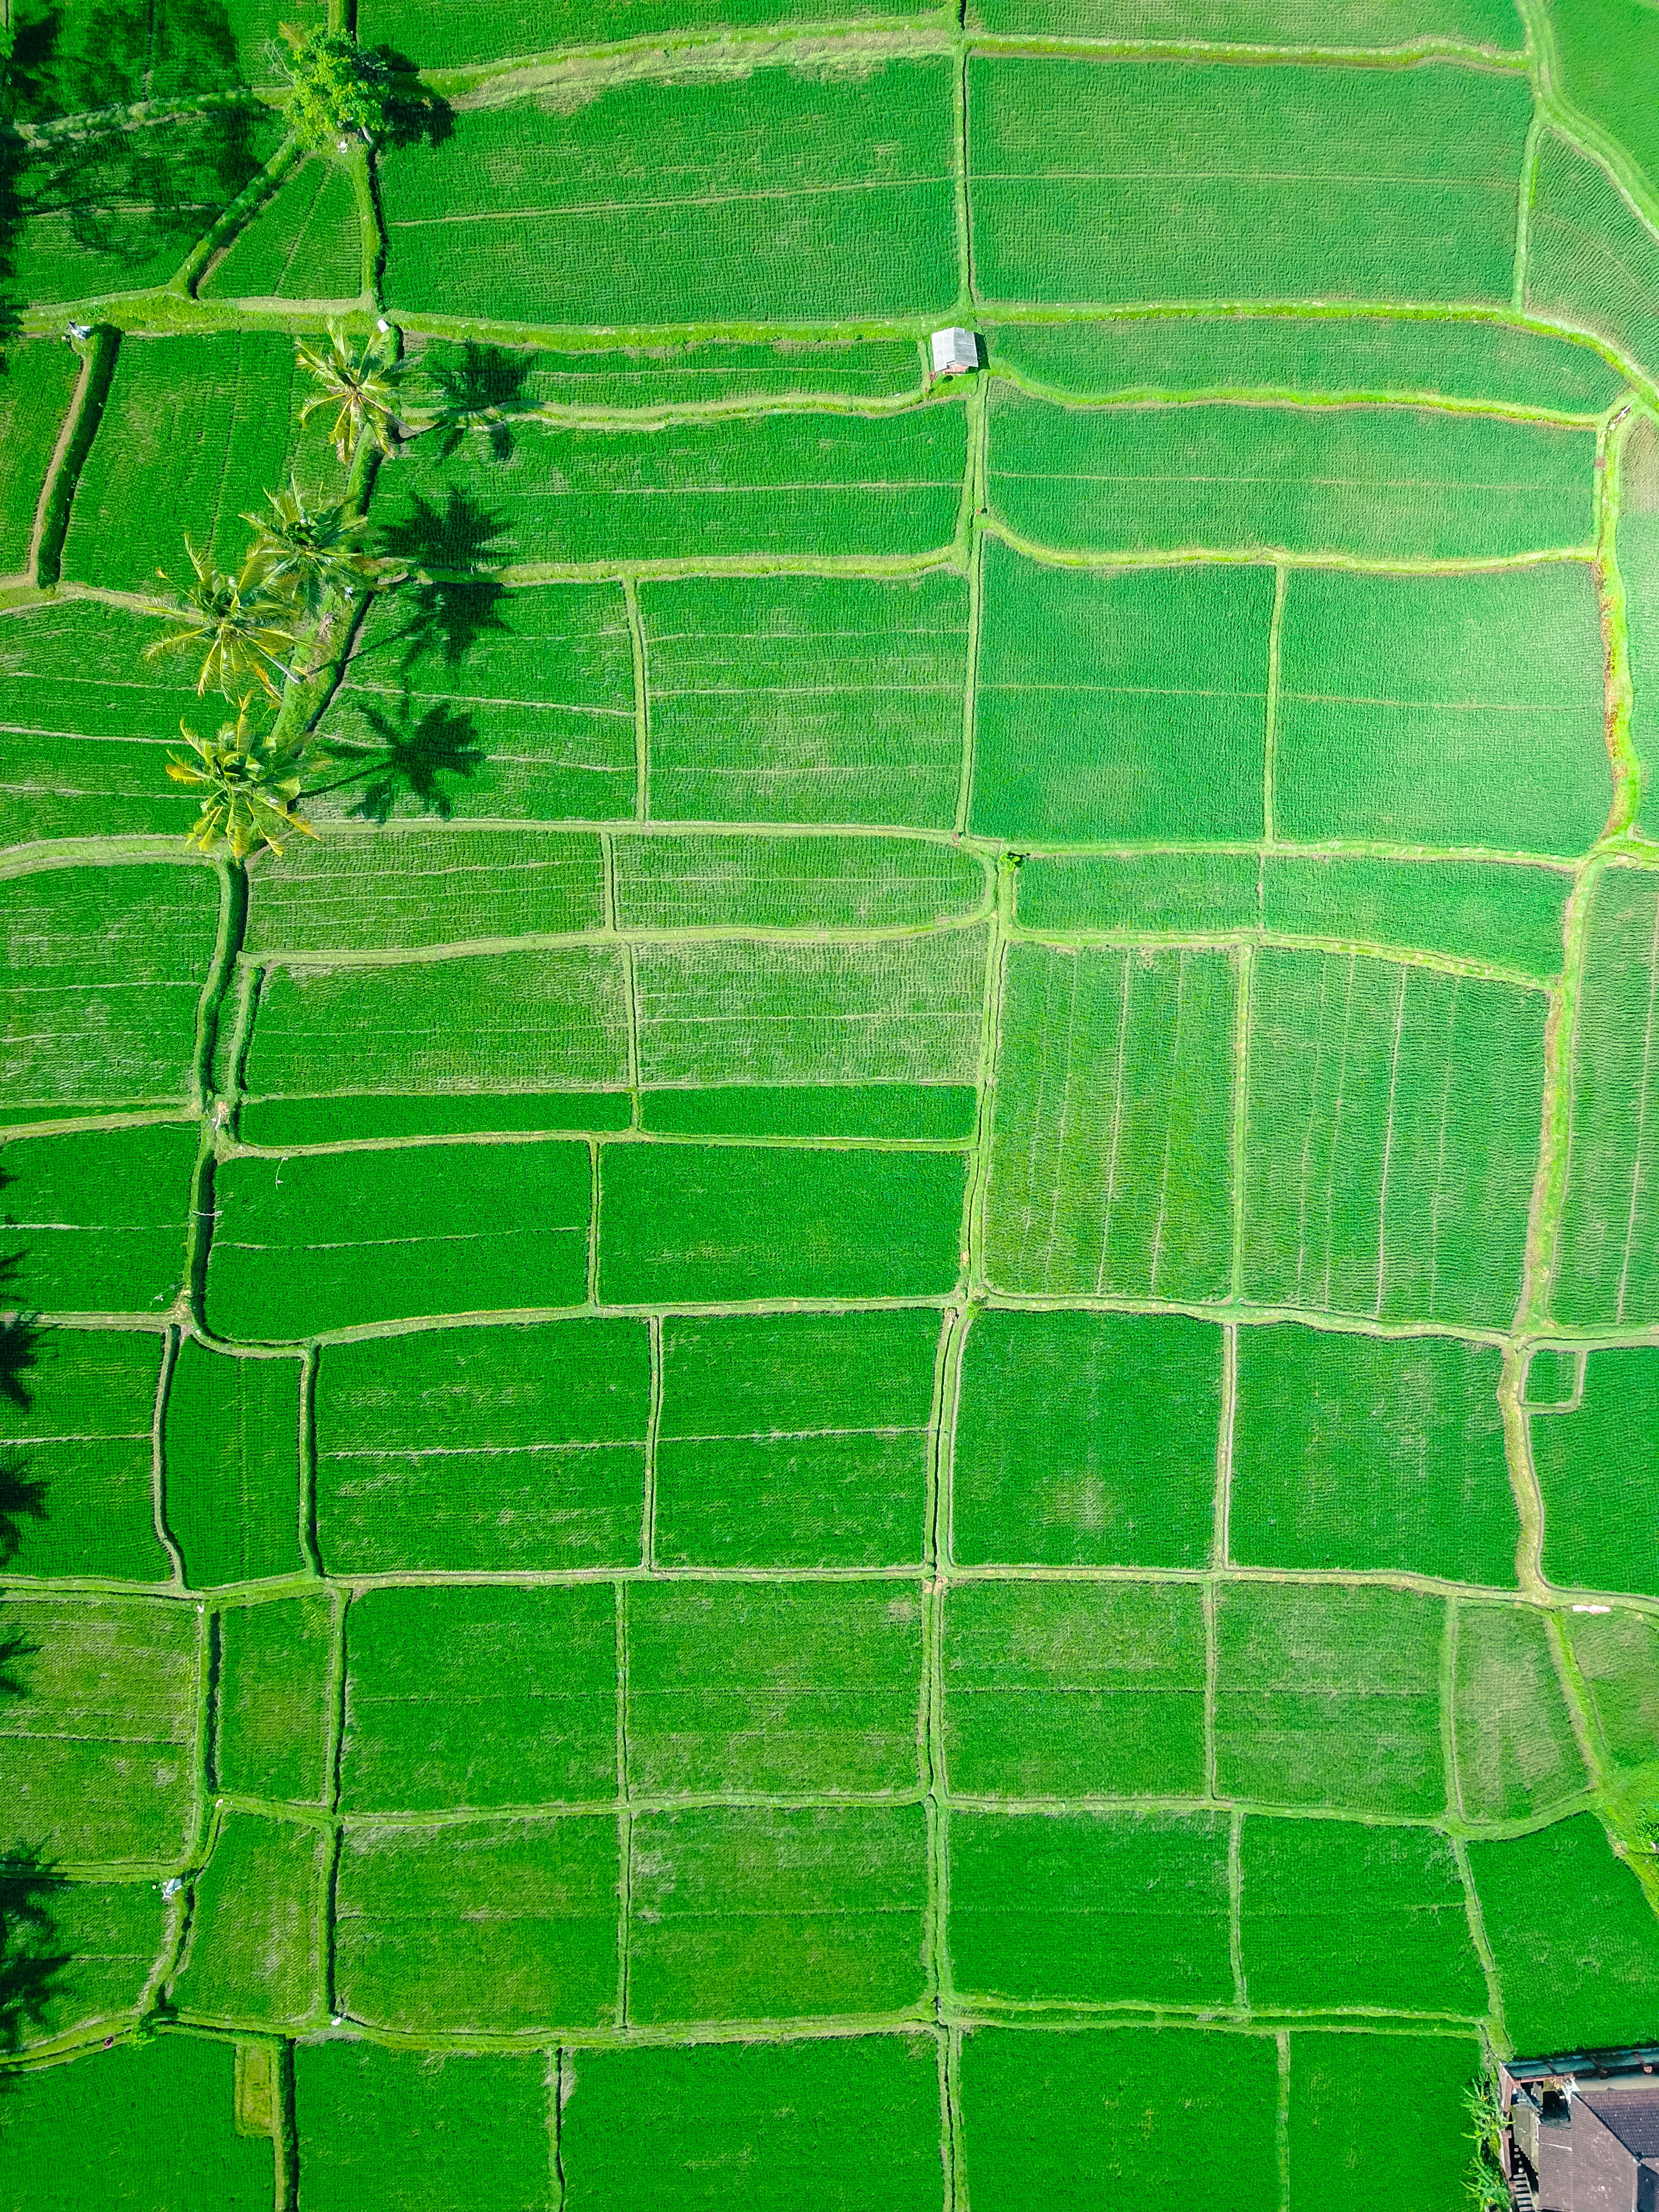 Mobile wallpaper indonesia, fields, nature, palms, green, ubud